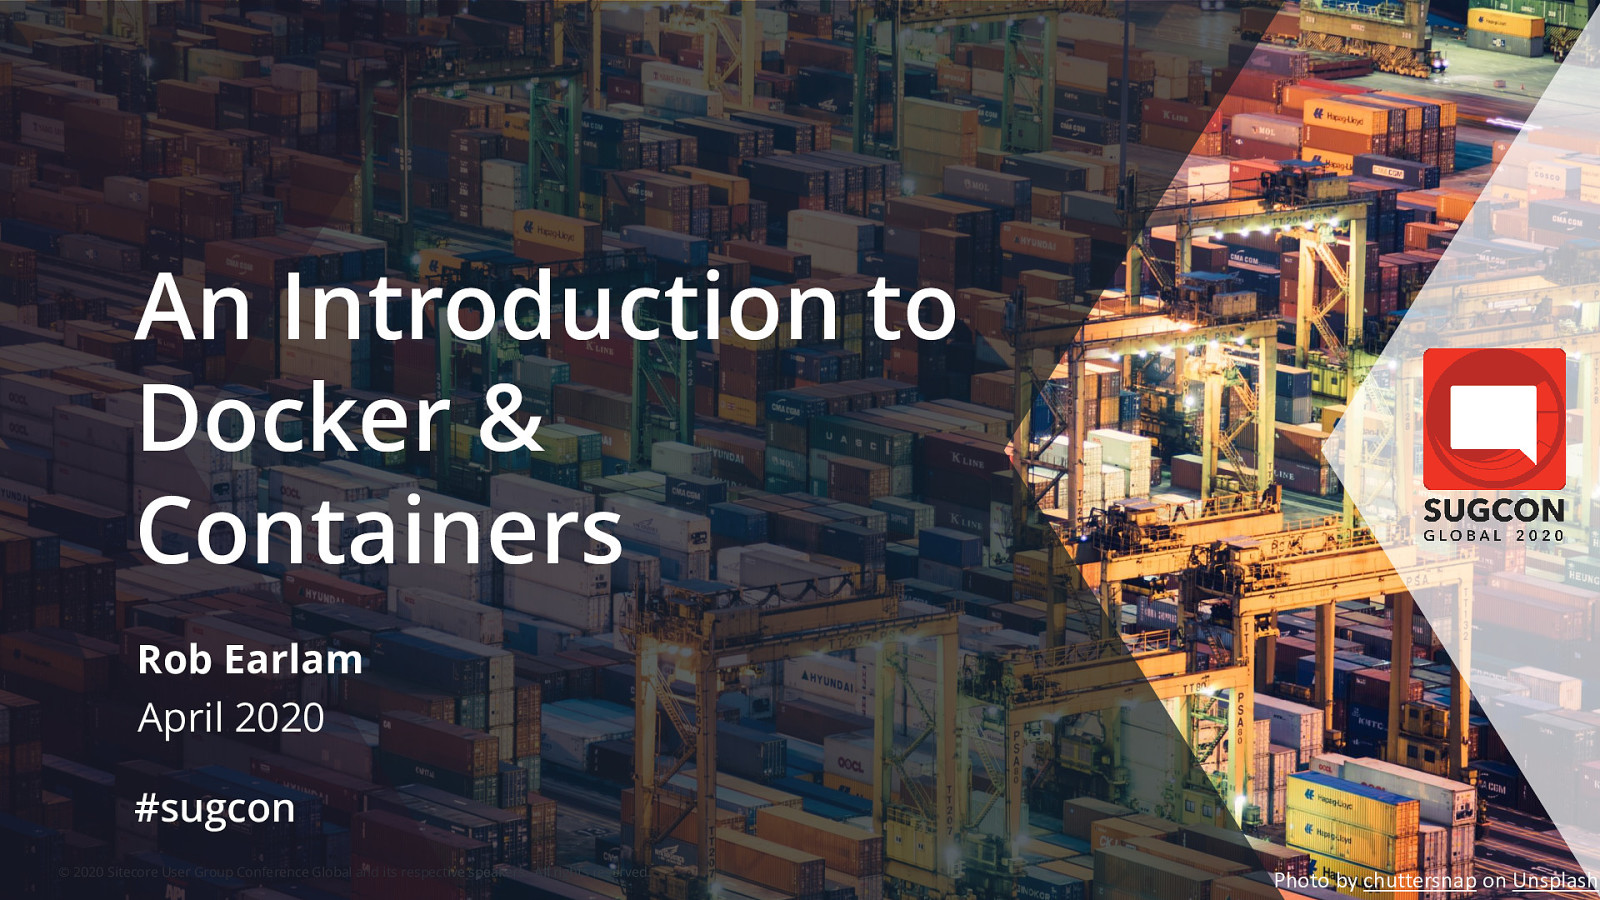 An Introduction to Docker & Containers